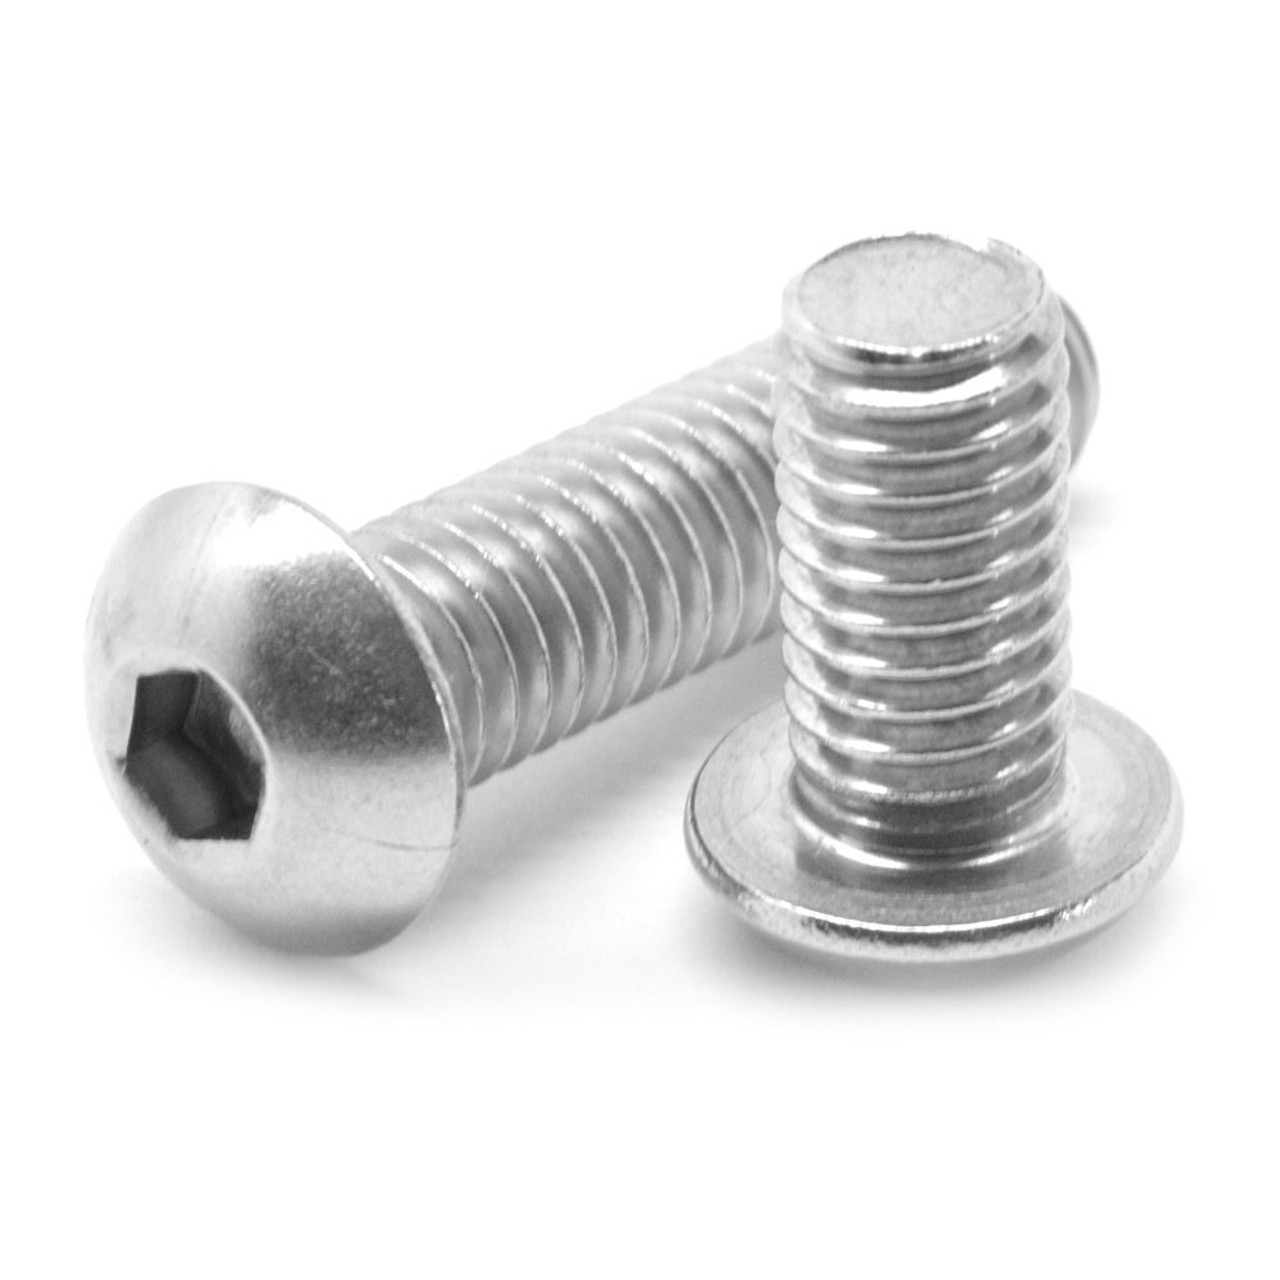 M4 x 0.70 x 4 MM (FT) Coarse Thread ISO 7380 Socket Button Head Cap Screw Stainless Steel 18-8